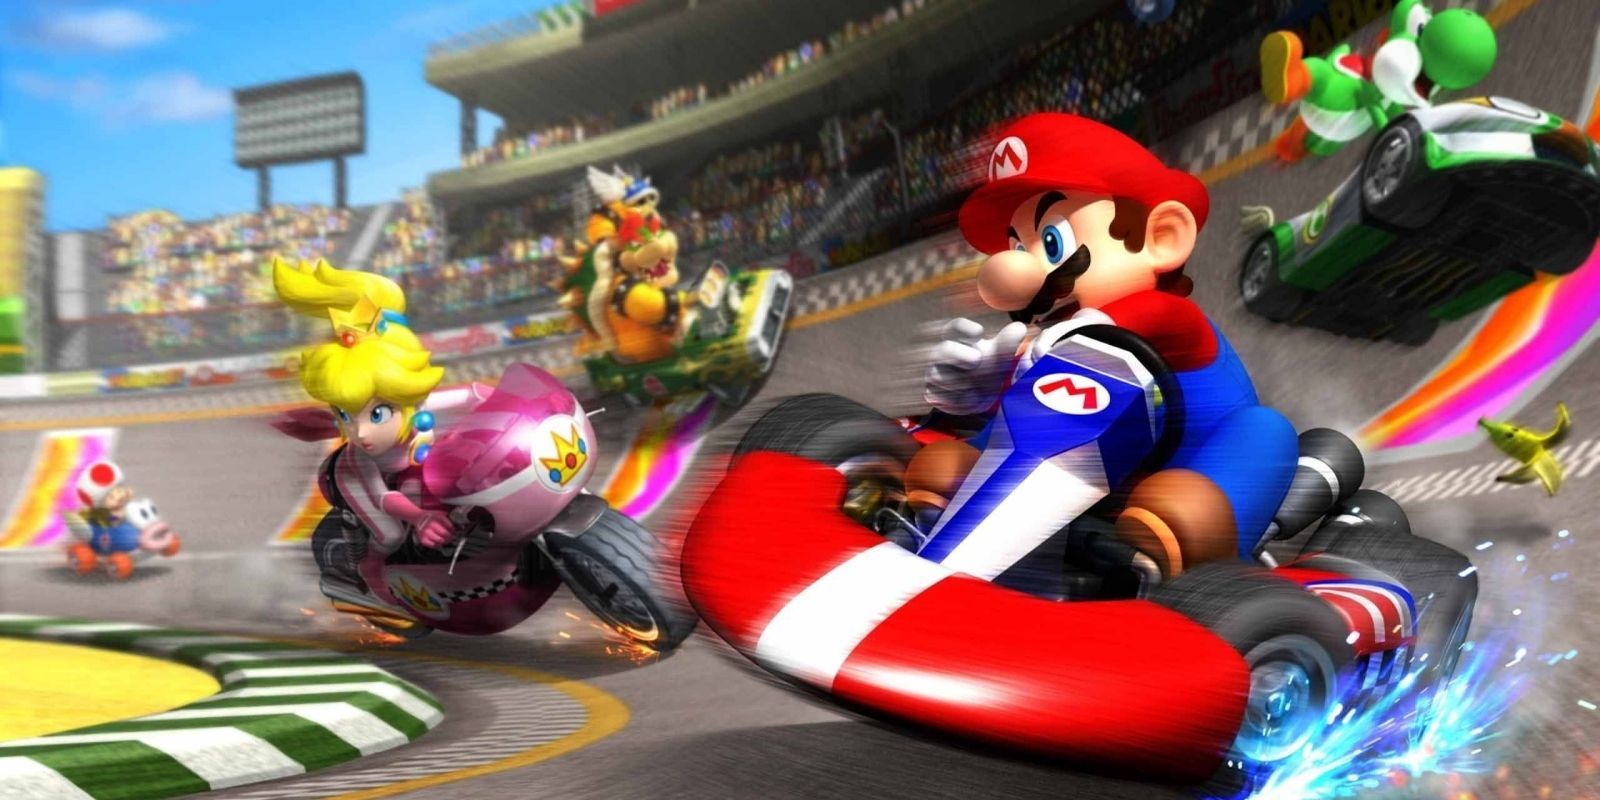 The characters of Mario Kart 8 engaged in a tight race